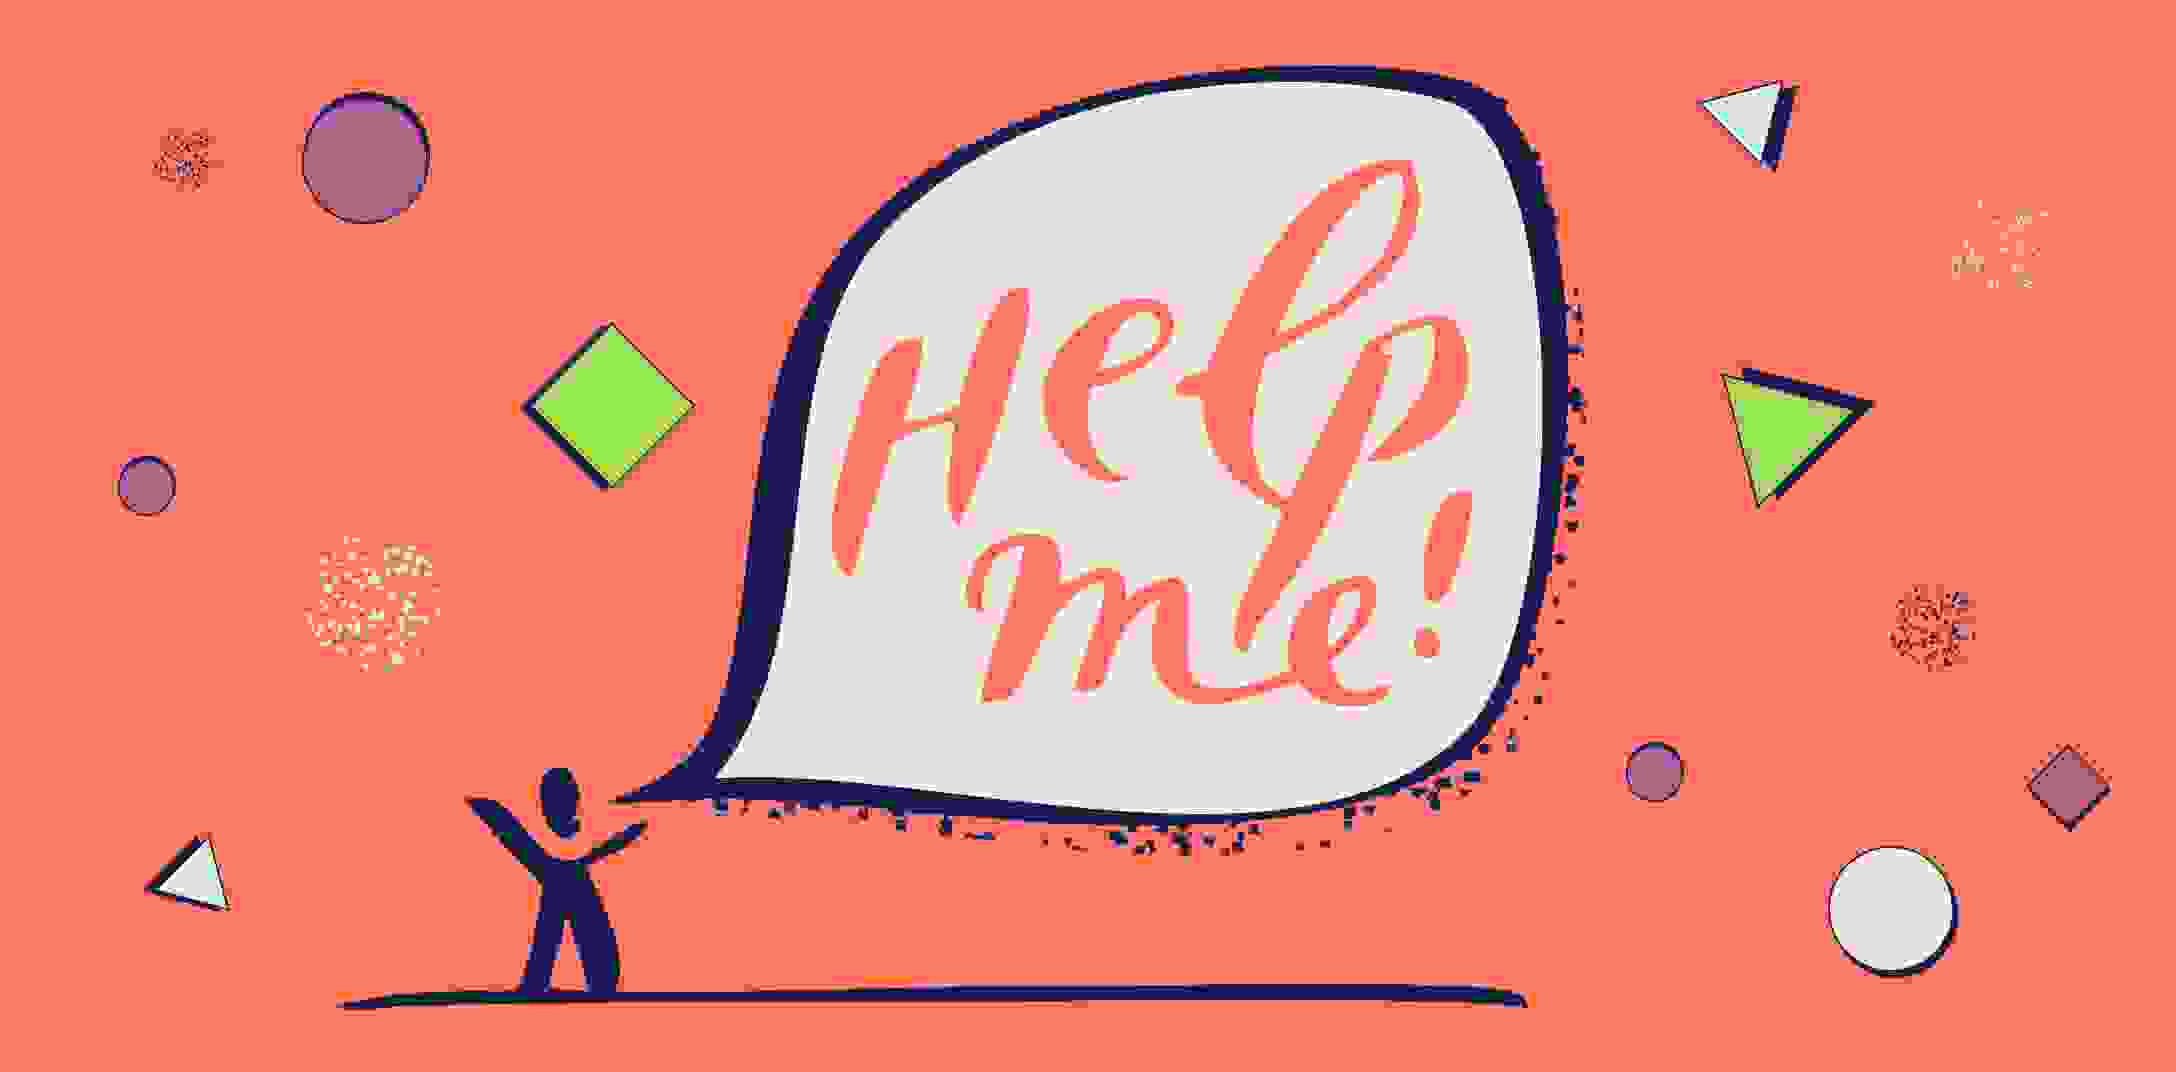 An illustration of a person shouting "help me"